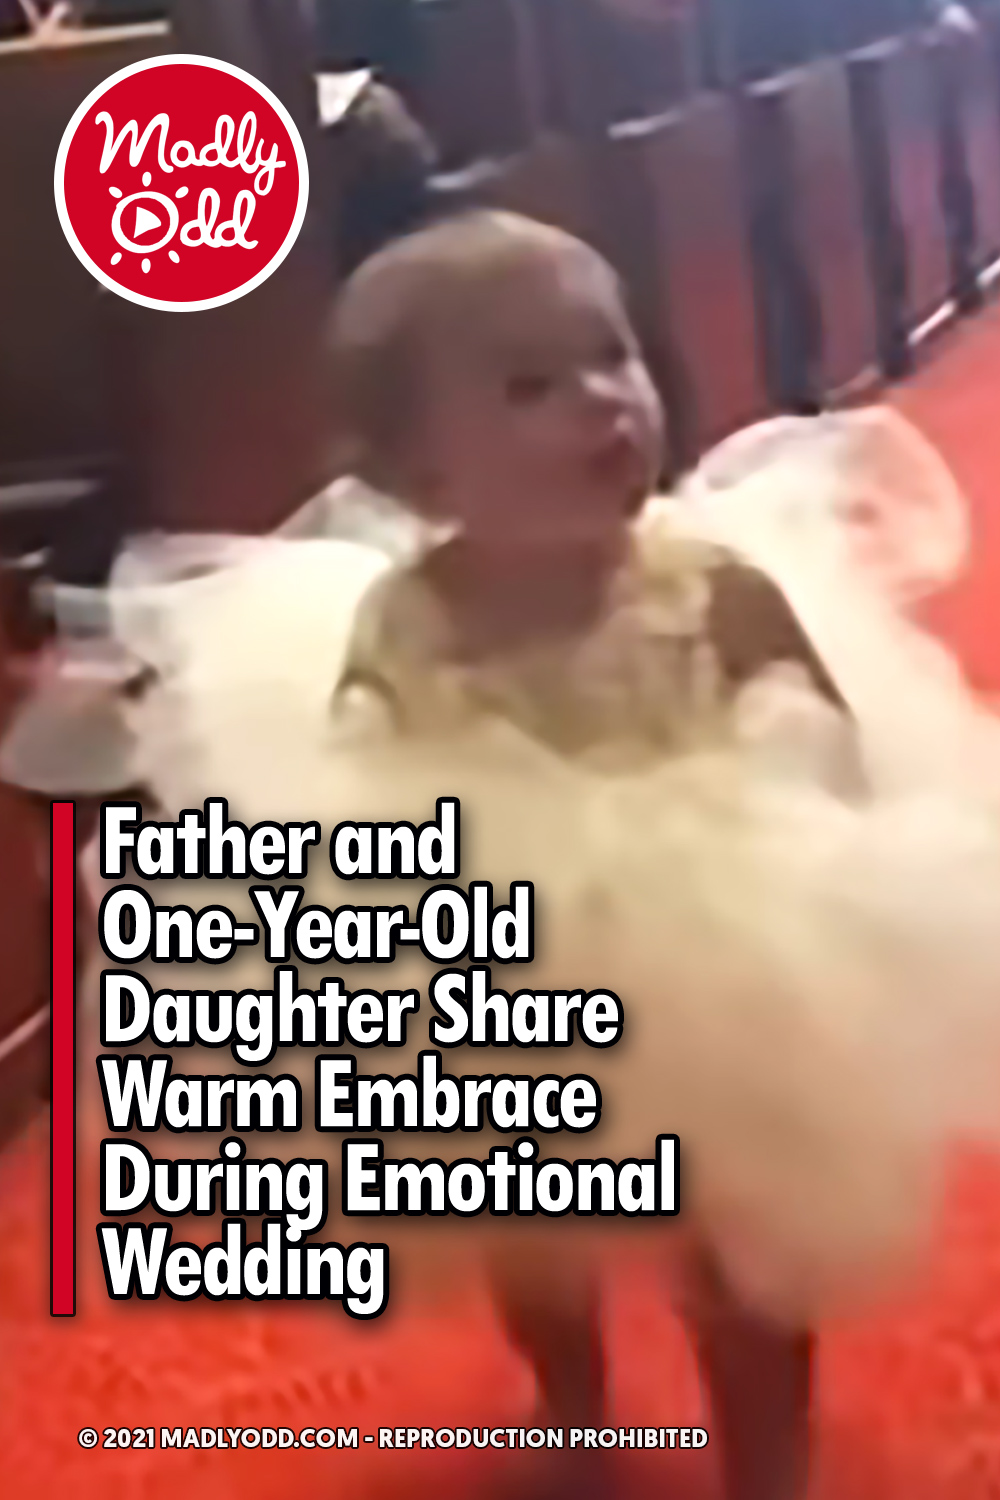 Father and One-Year-Old Daughter Share Warm Embrace During Emotional Wedding